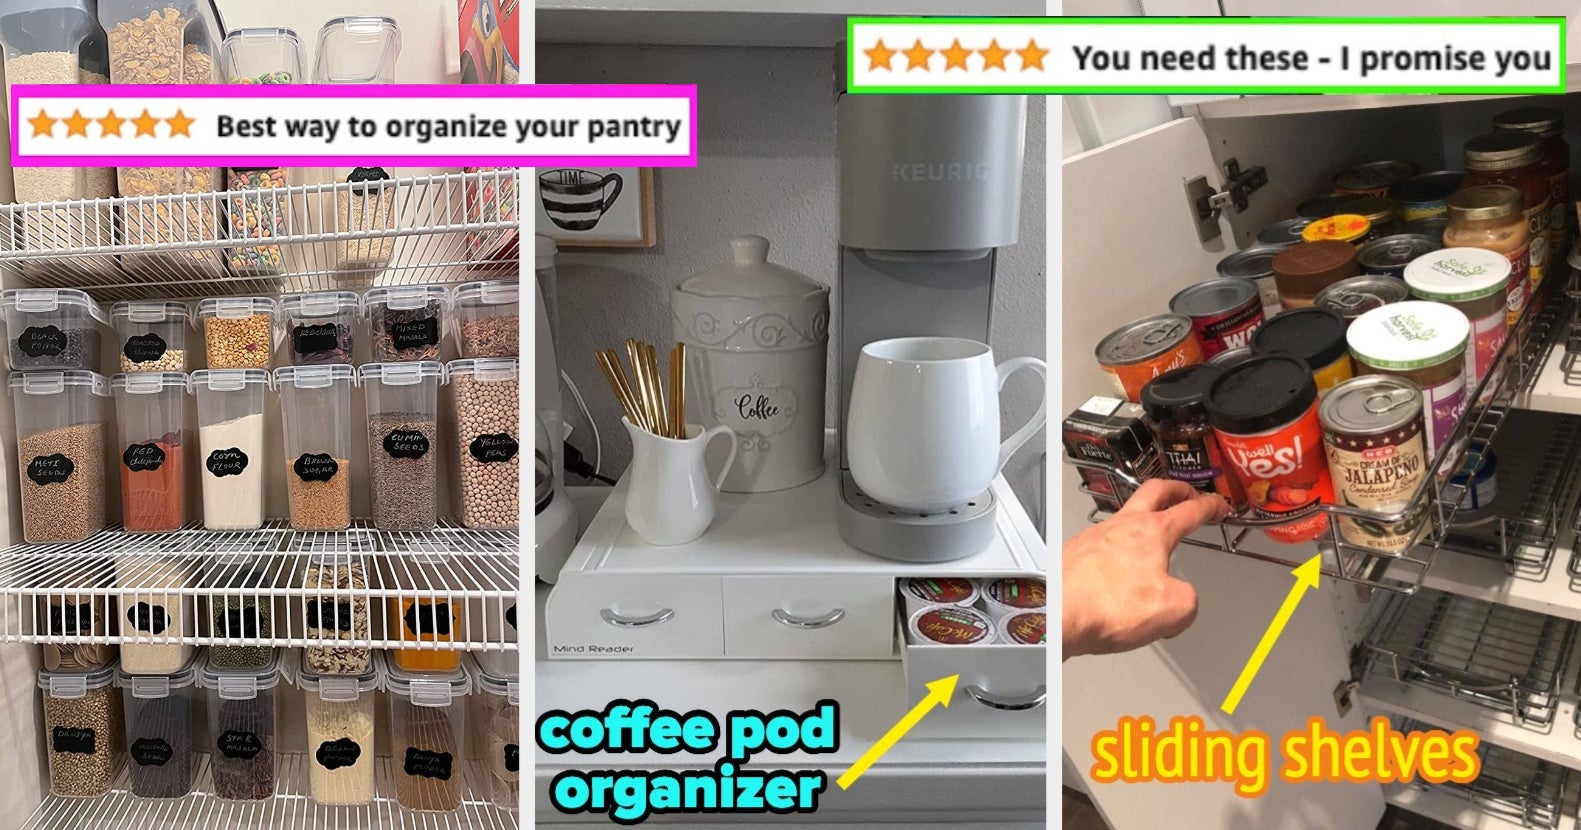 Lynk Professional Slide Out Coffee Pod Holder Organizer Upper Kitchen Cabinet Pull Out Rack, Compatible with Keurig K-Cup, Chrome, Silver